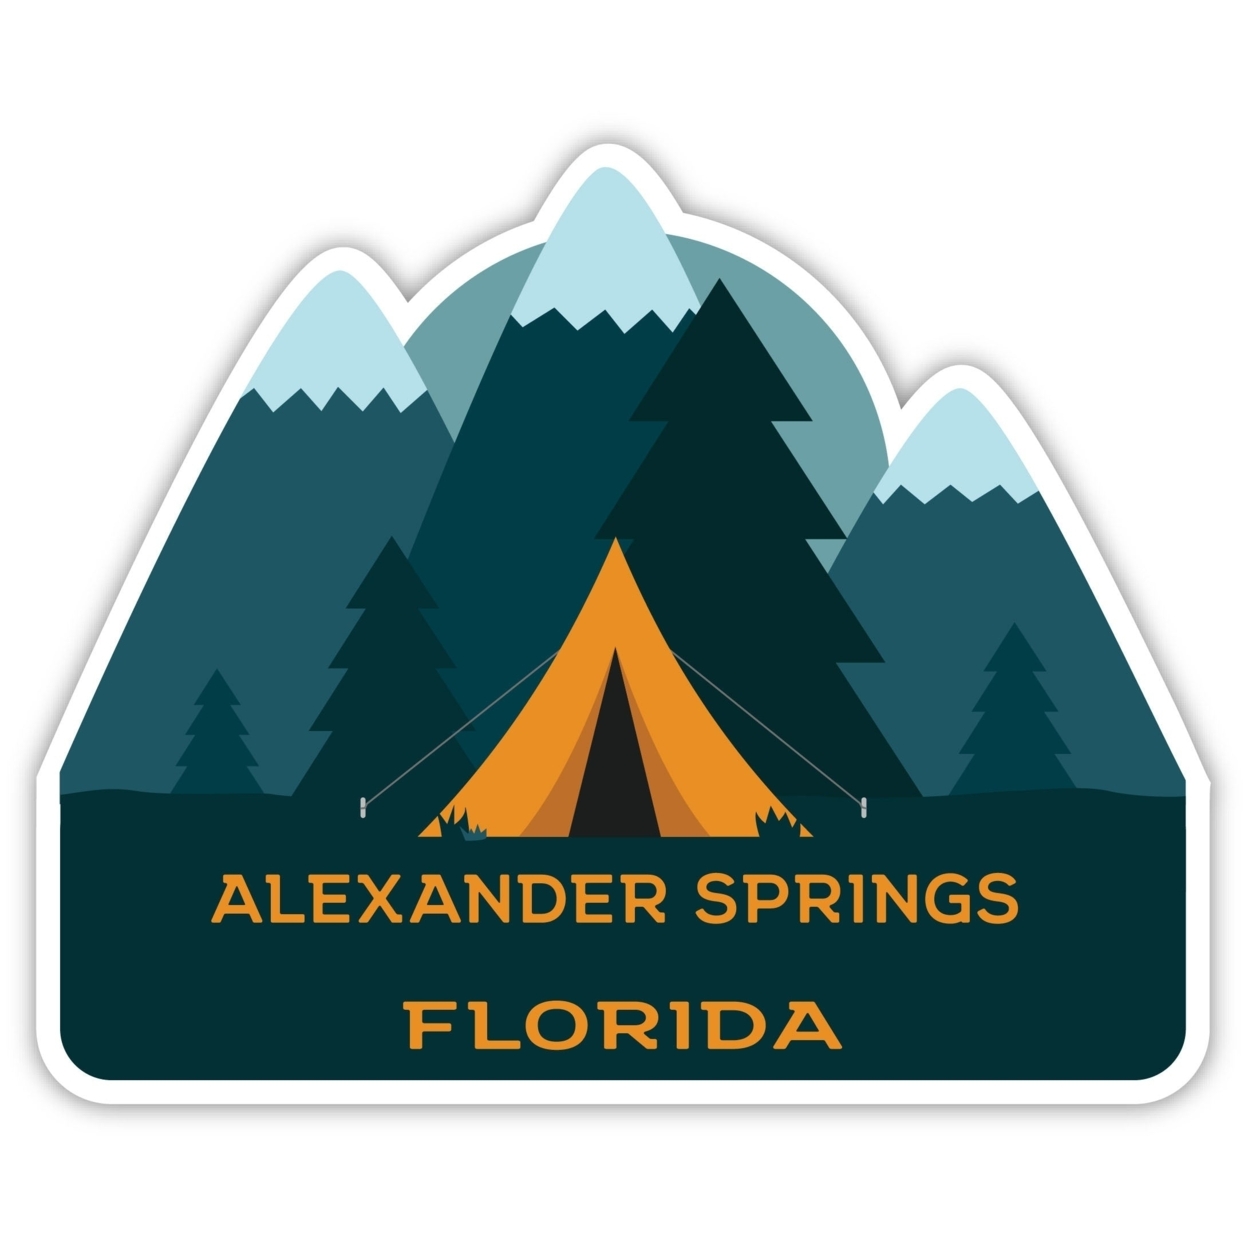 Alexander Springs Florida Souvenir Decorative Stickers (Choose Theme And Size) - 4-Pack, 6-Inch, Tent